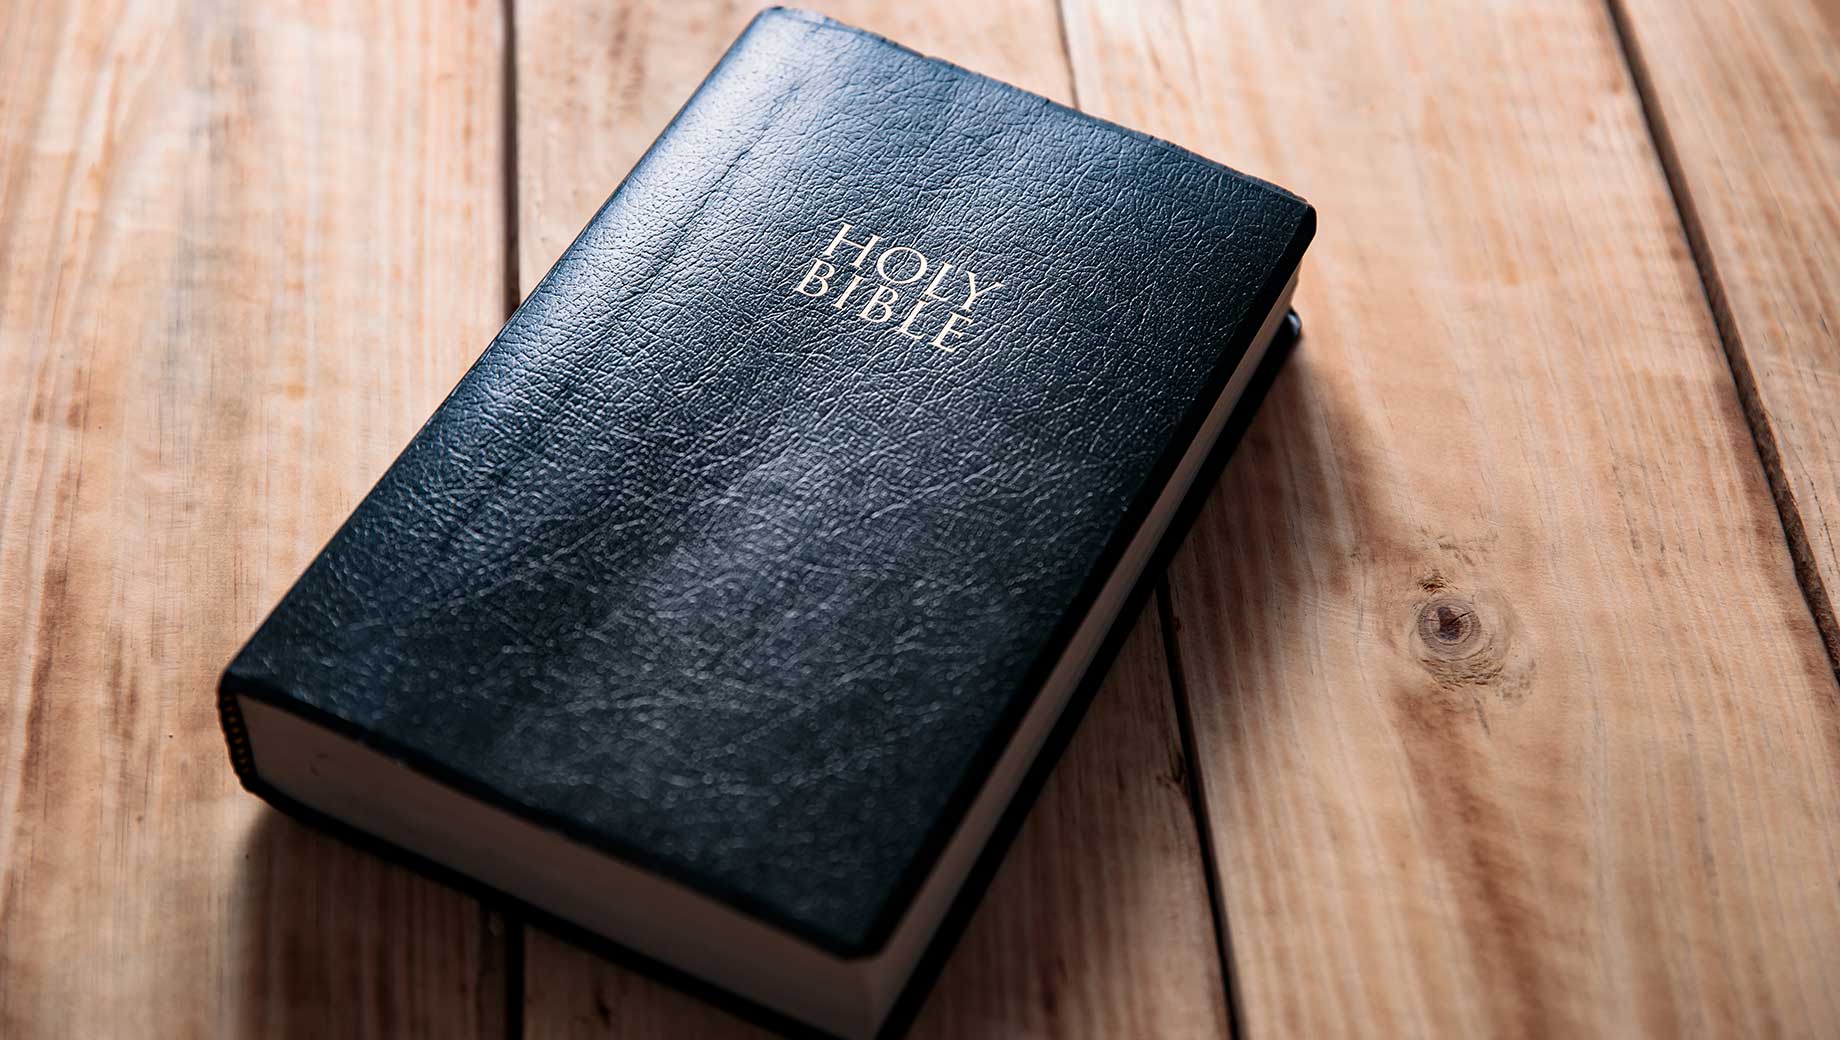 Fewer in U.S. Now See Bible as Literal Word of God